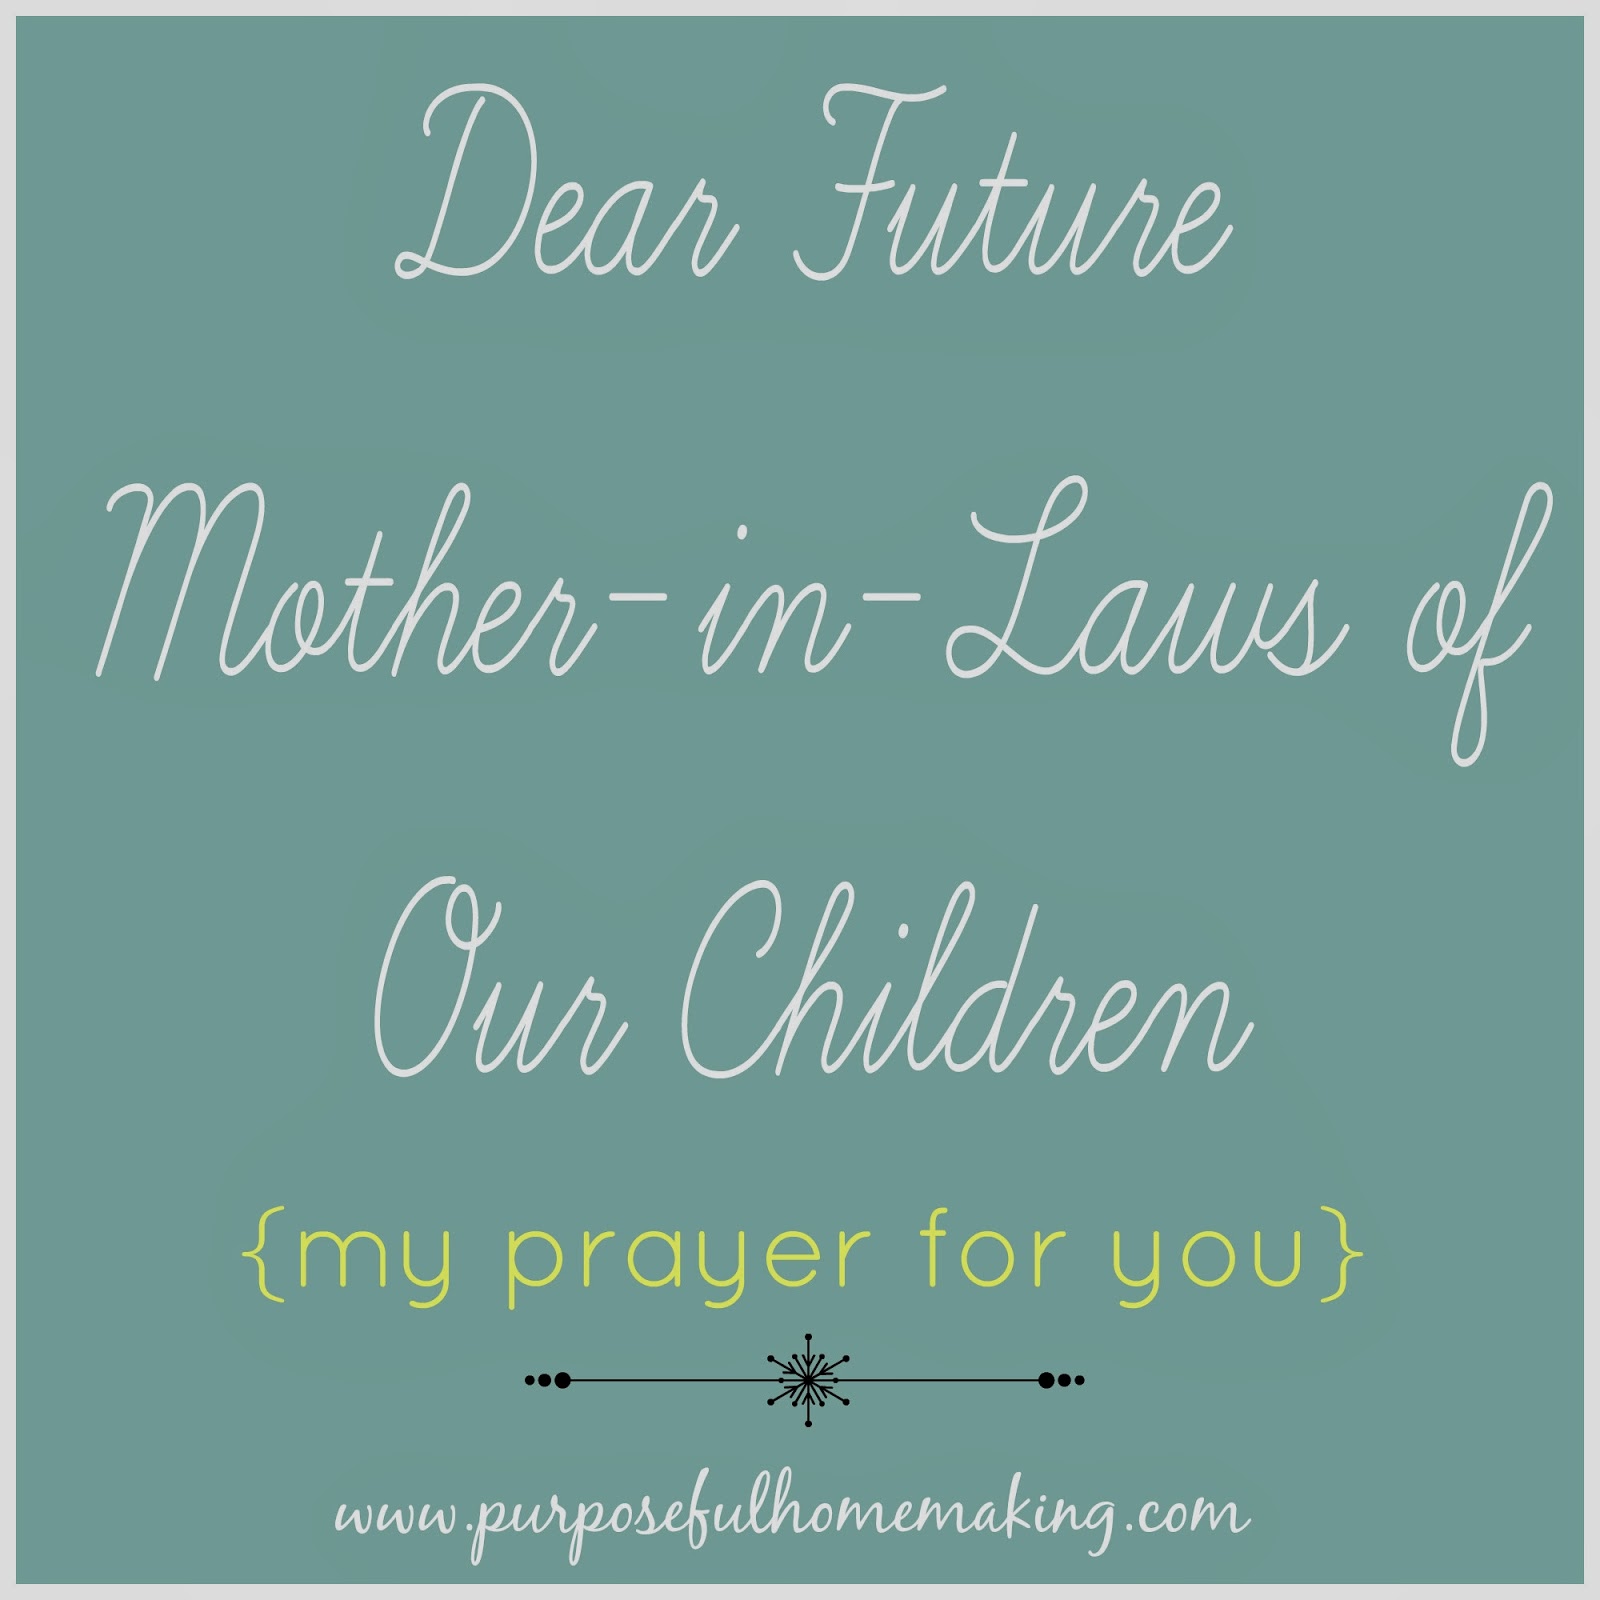 Purposeful Homemaking: Dear Future Mother-in-Laws of Our Children